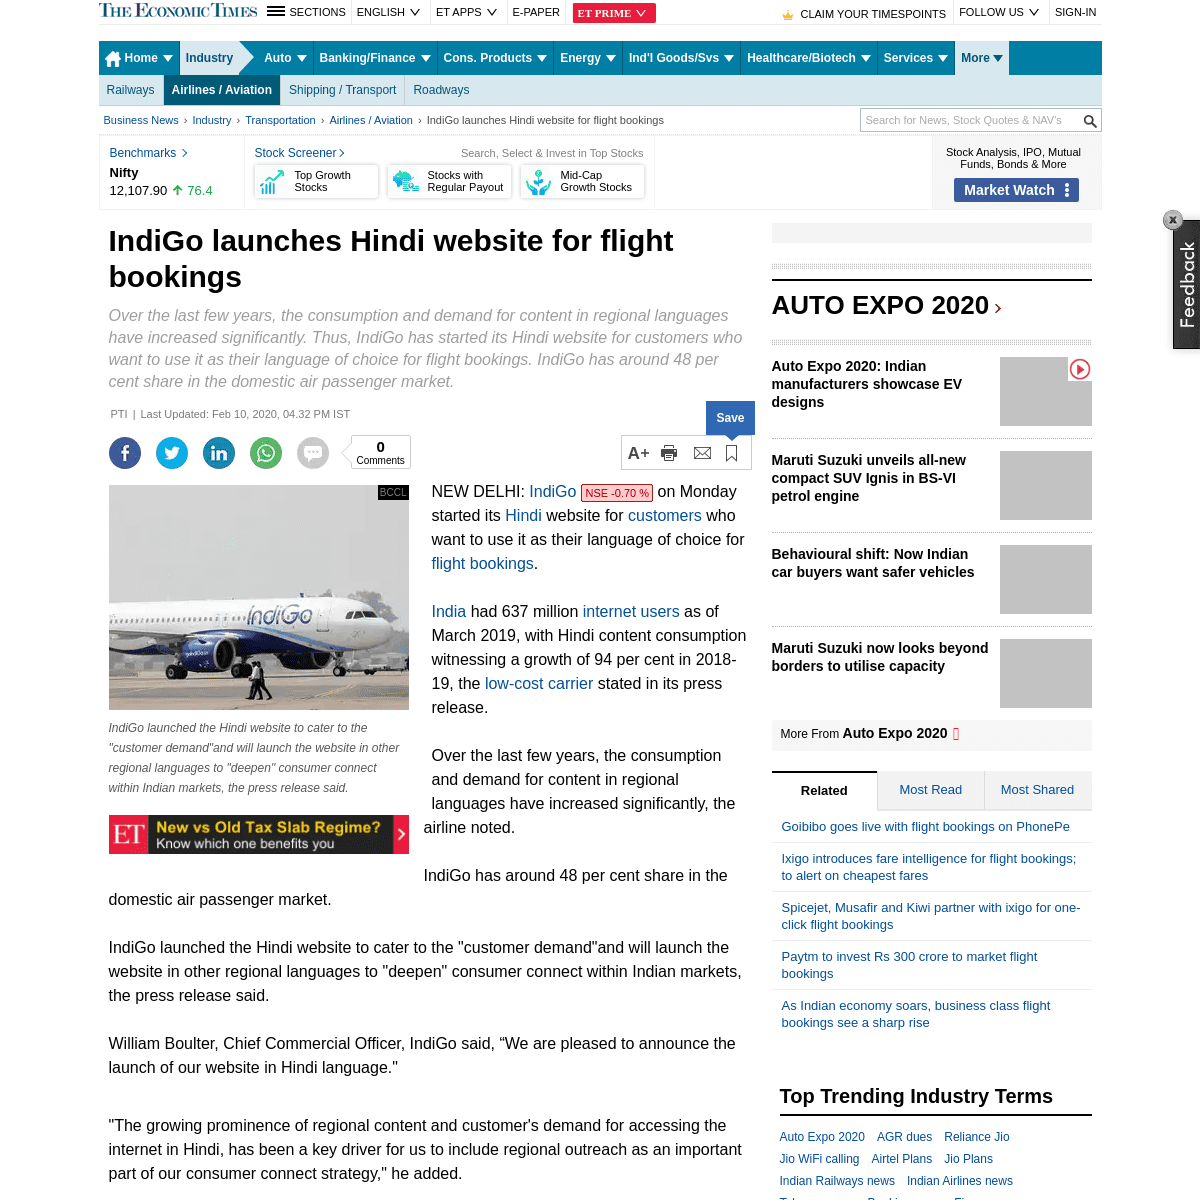 A complete backup of economictimes.indiatimes.com/industry/transportation/airlines-/-aviation/indigo-launches-hindi-website-for-